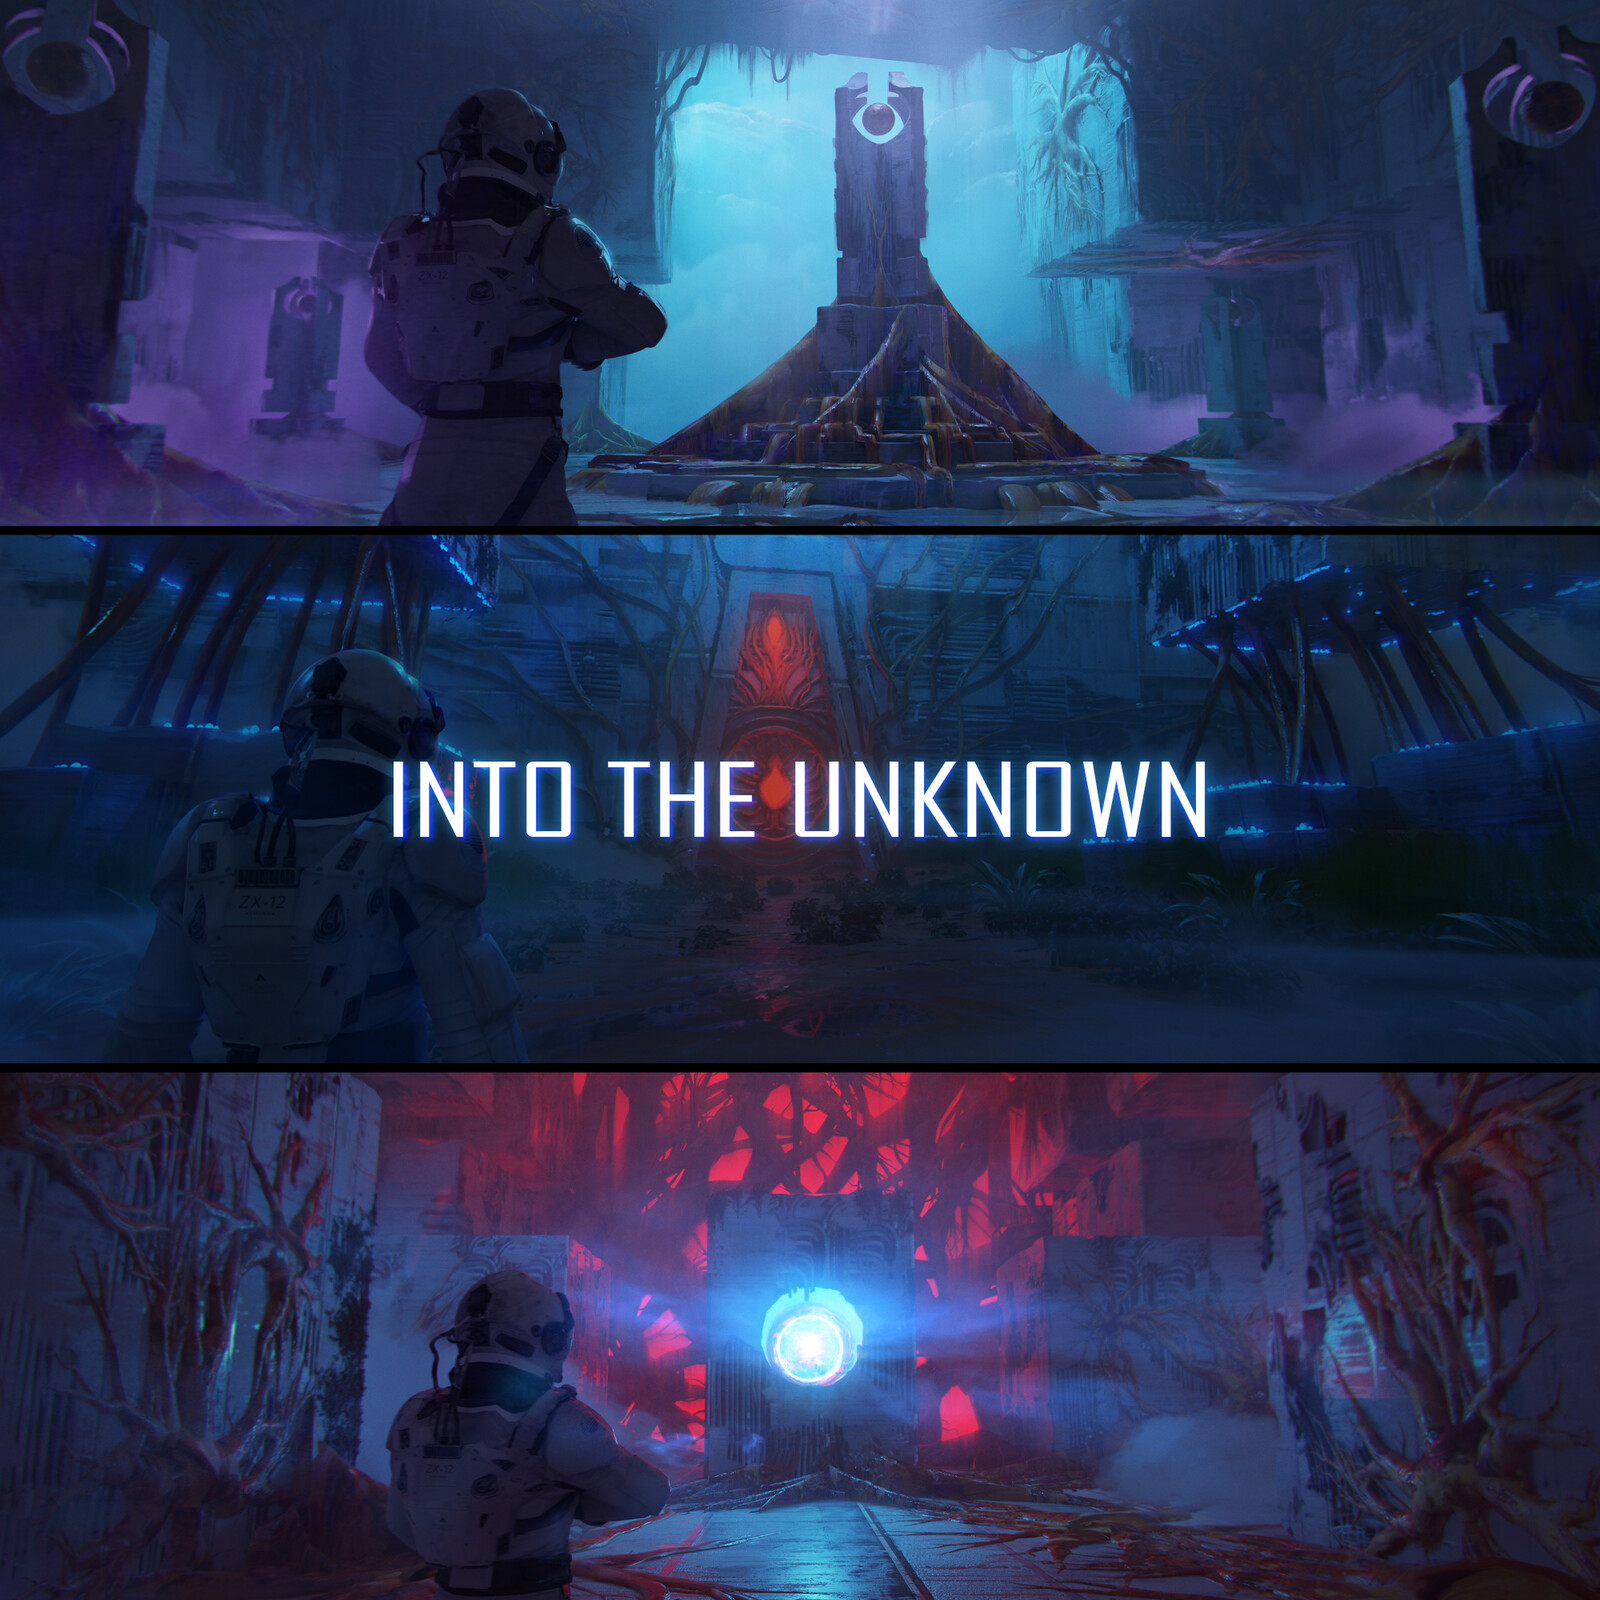 INTO THE UNKNOWN